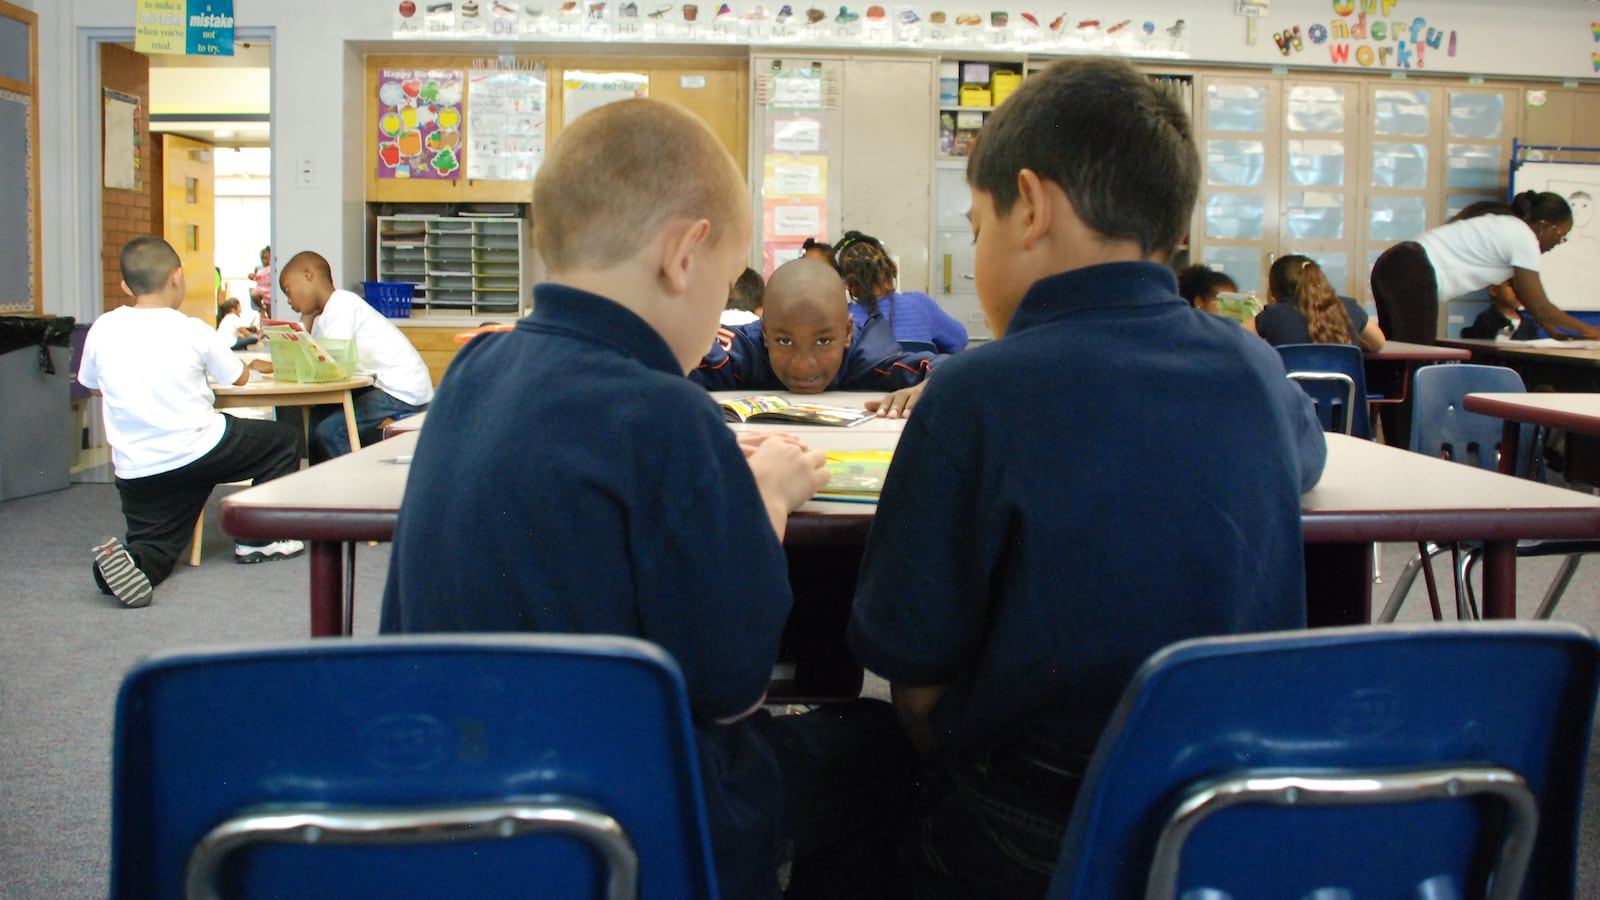 Students go to work at a Denver elementary school.